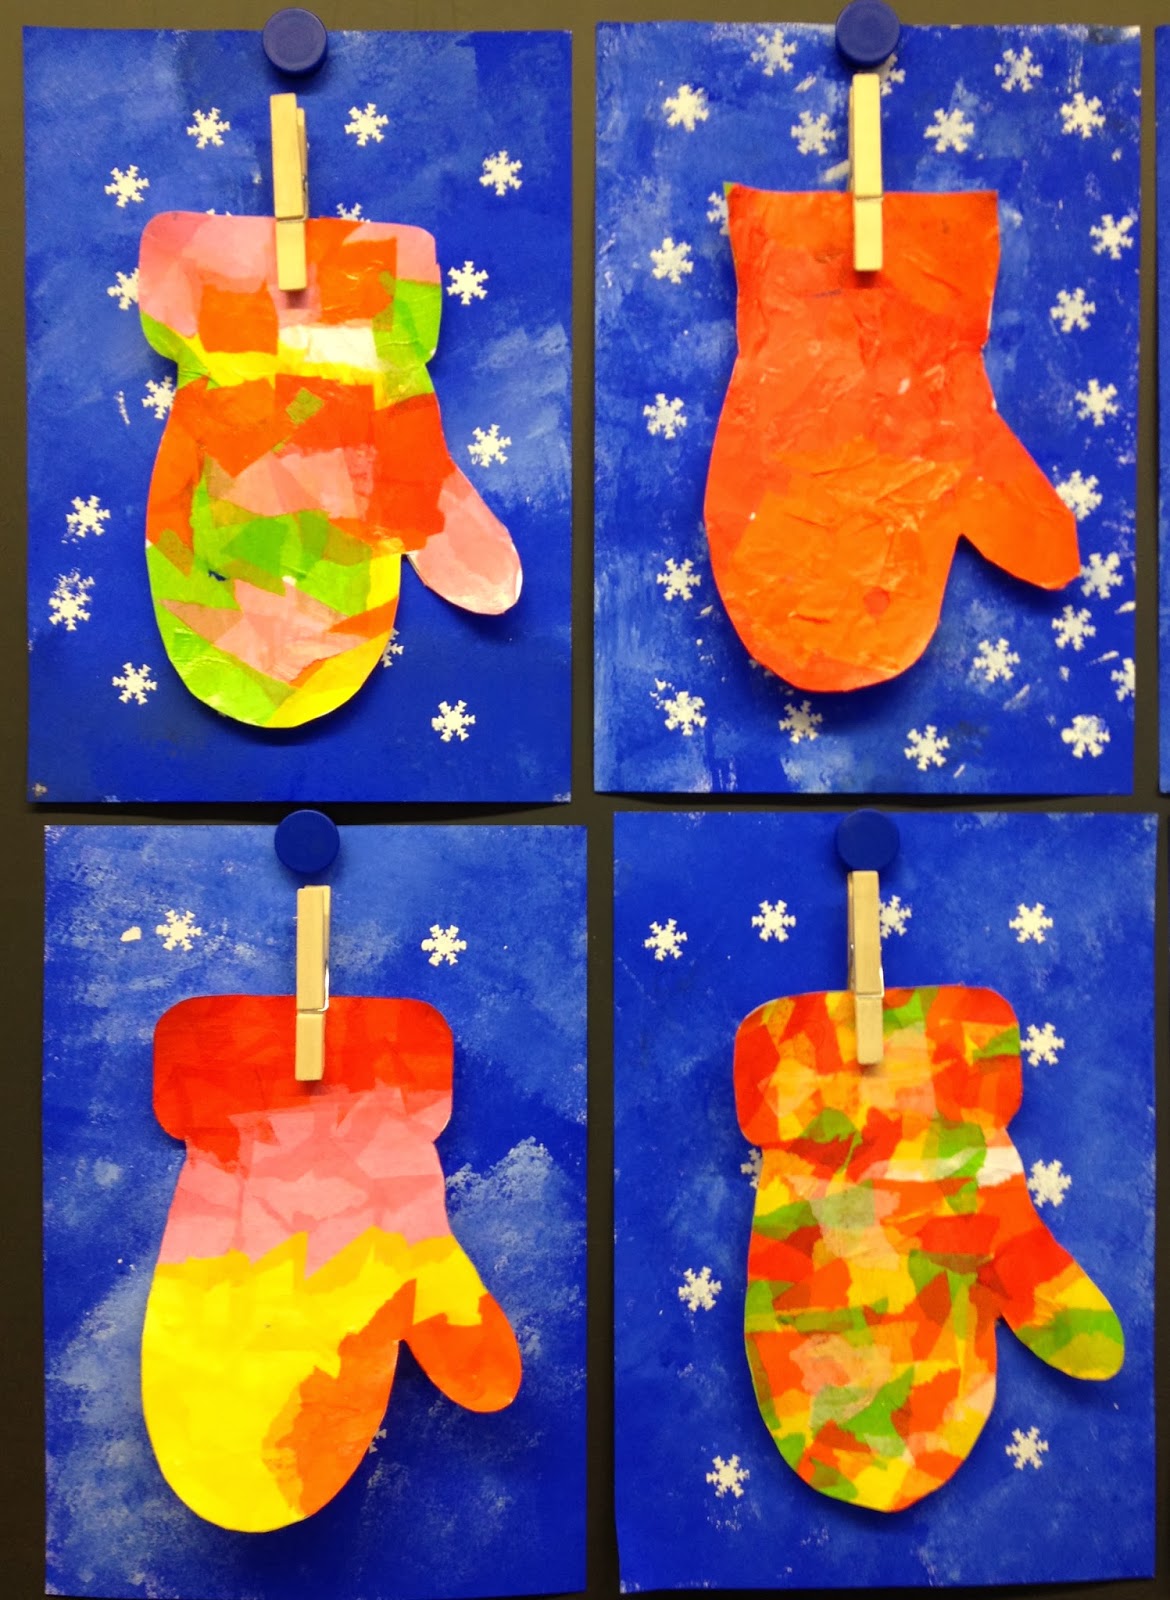 Easy-To-make Colorful Paper Mitten CraftWinter Mitten Craft For Preschoolers